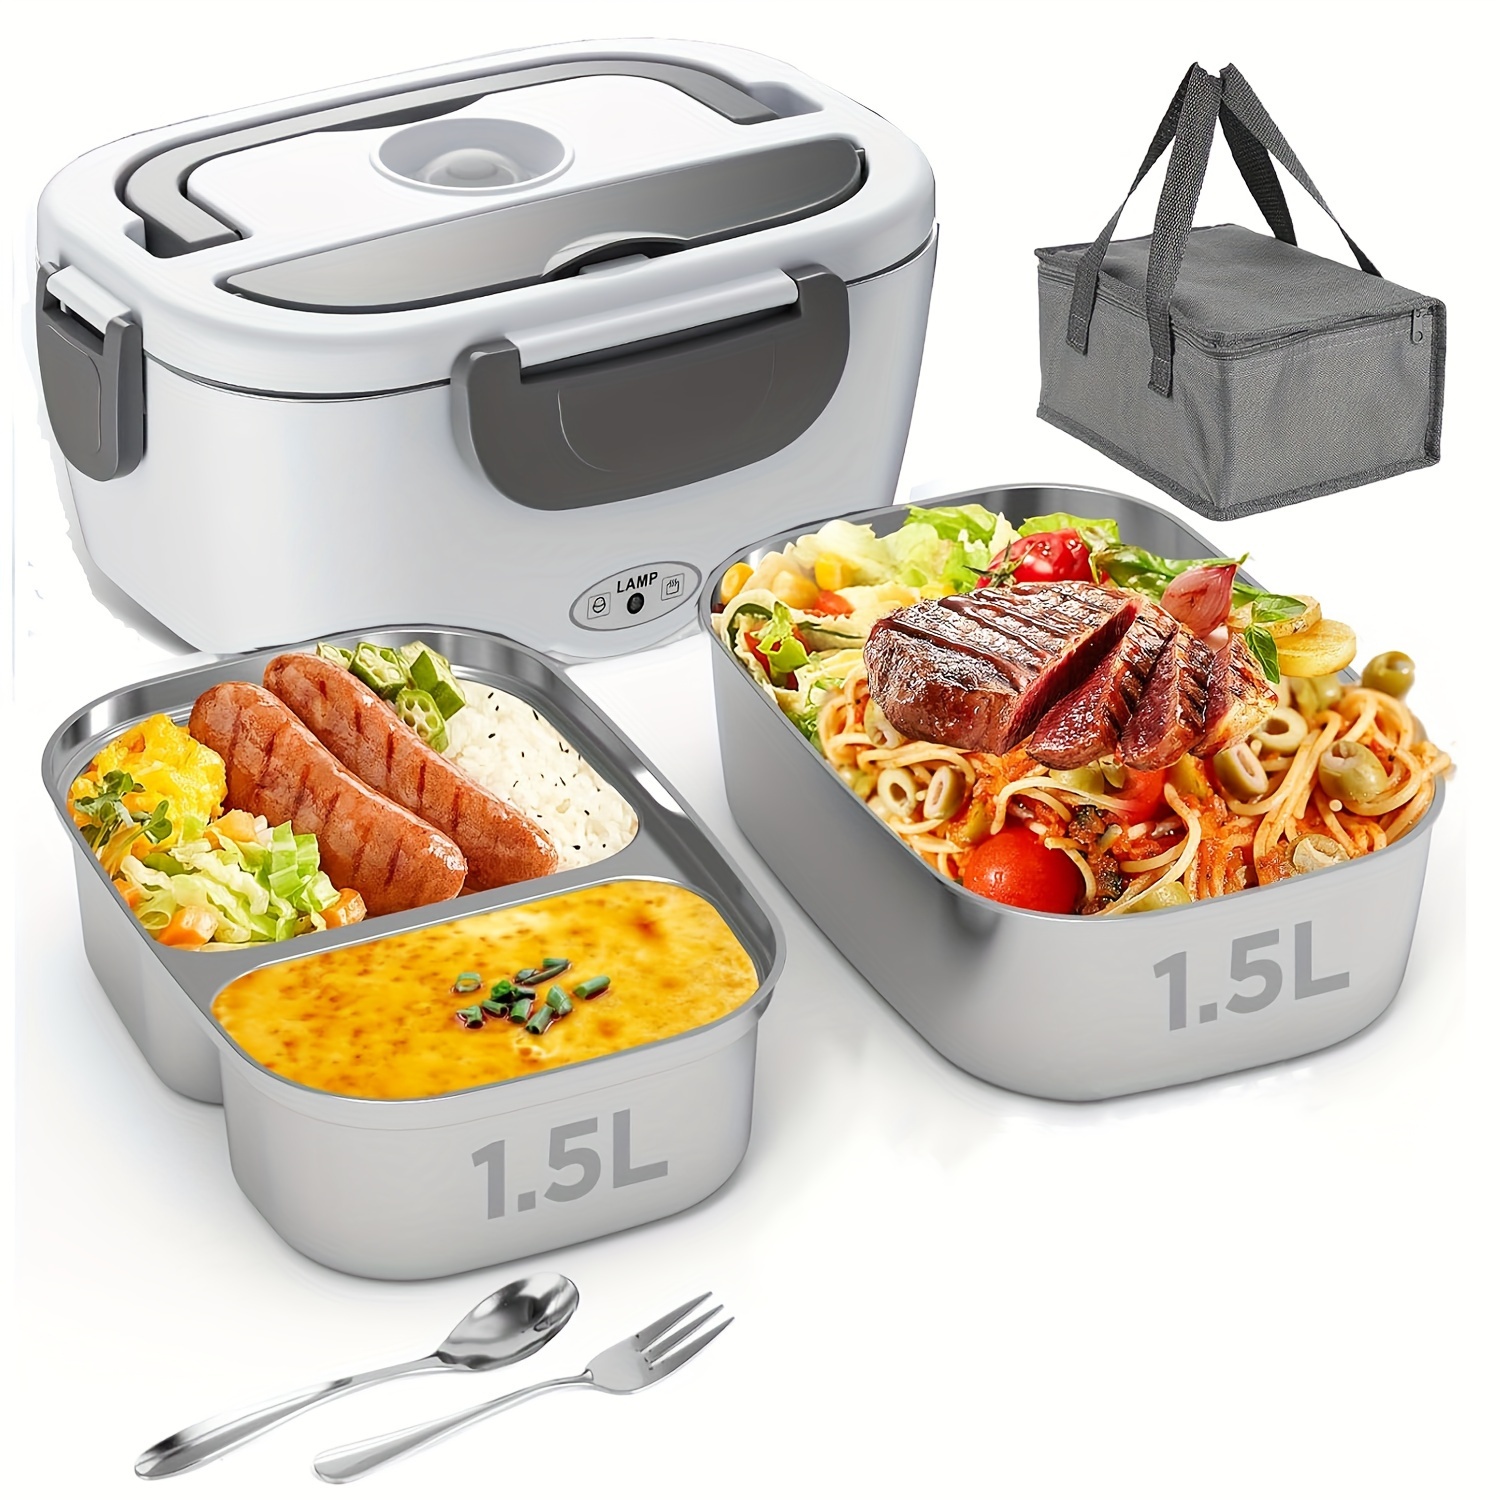 

Electric Lunch Box - Portable Fast Heating Lunch Box (12v/24v/110v) - 1.5l Stainless Steel Container Adult Food Warmer - Suitable For Cars, Trucks, Offices And Outdoors (white)